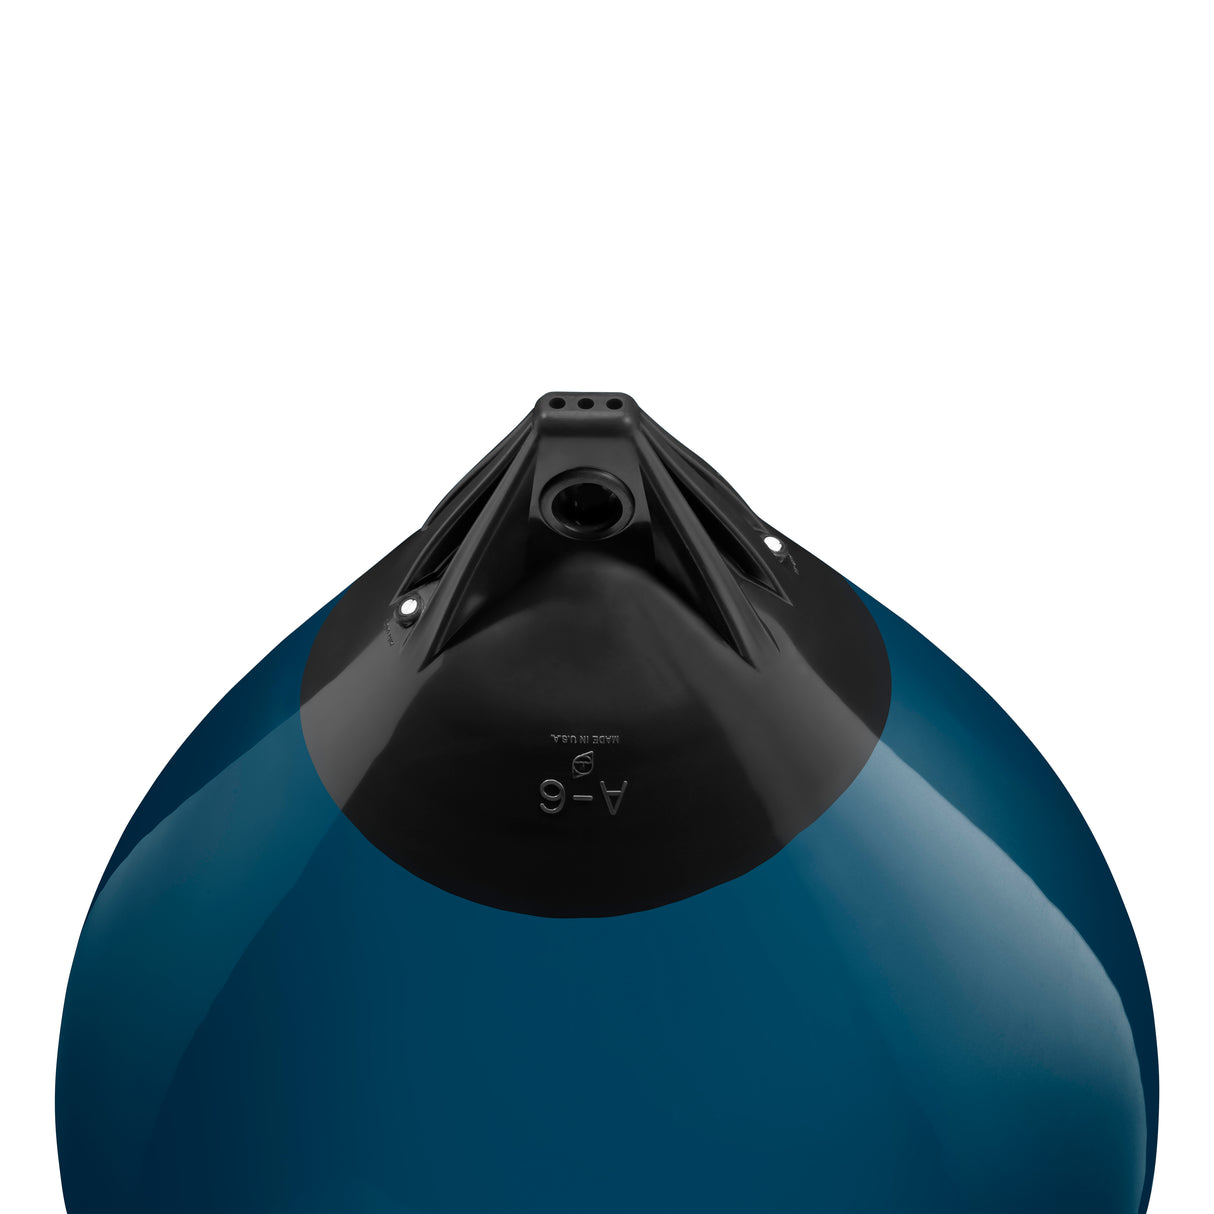 Catalina Blue buoy with Black-Top, Polyform A-6 angled shot